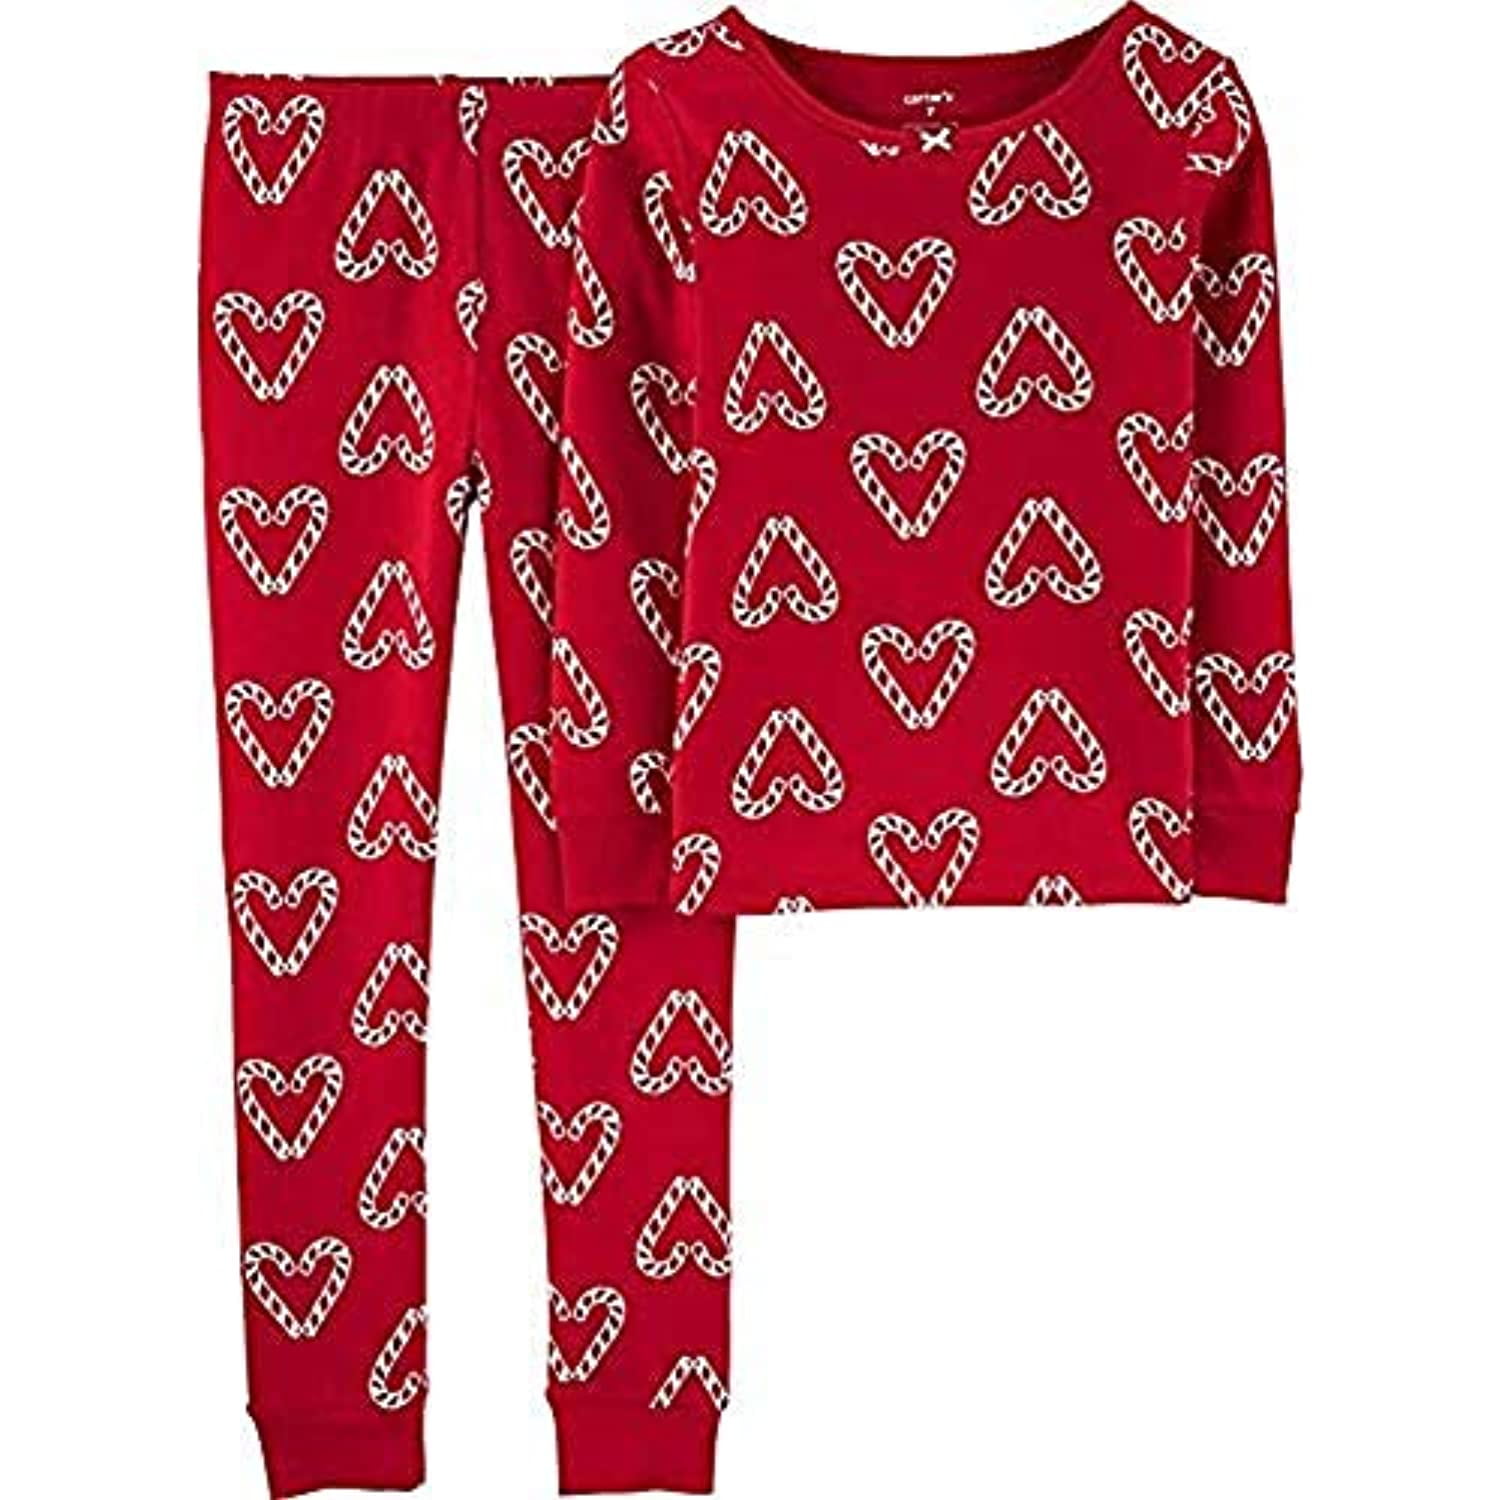 Carter's Wake Me When It's Caturday Pajamas Girls Size 3T 4T New 3 Piece Set 